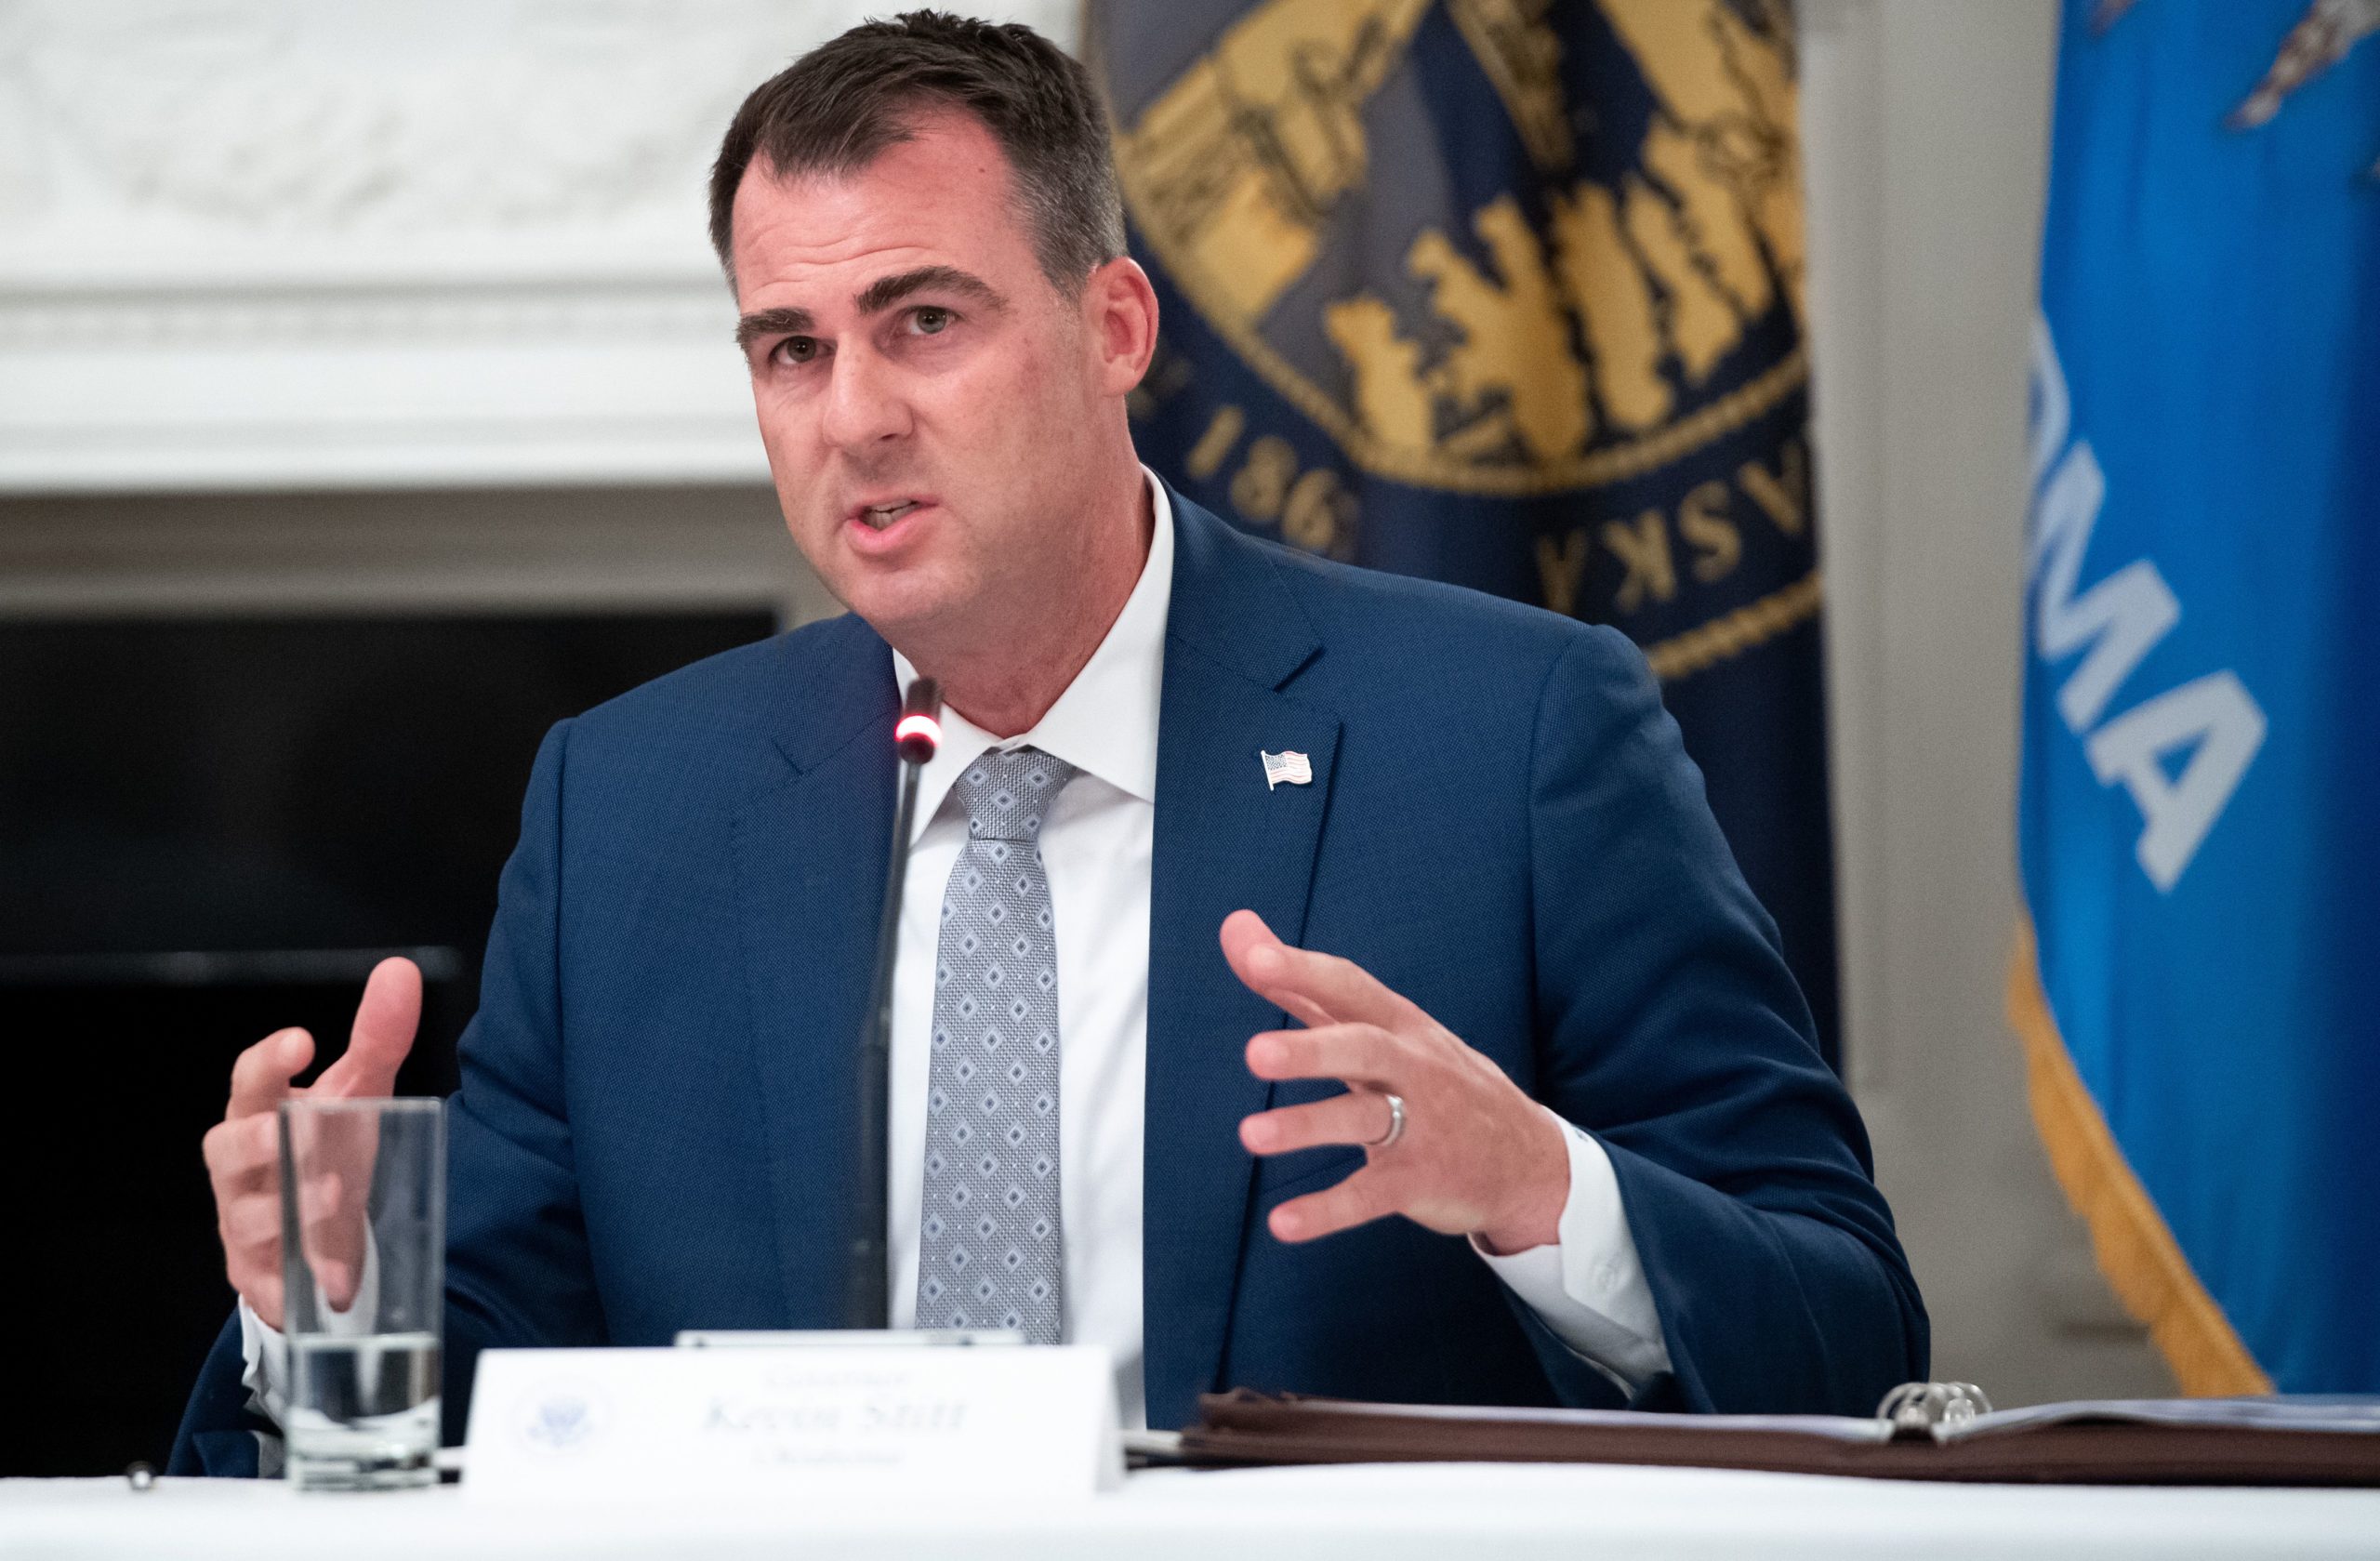 Oklahoma Governor Kevin Stitt speaks during a roundtable discussion with US President Donald Trump about economic reopening of closures due to COVID-19, known as coronavirus, in the State Dining Room of the White House in Washington, DC, June 18, 2020. (Photo by SAUL LOEB / AFP) (Photo by SAUL LOEB/AFP via Getty Images)